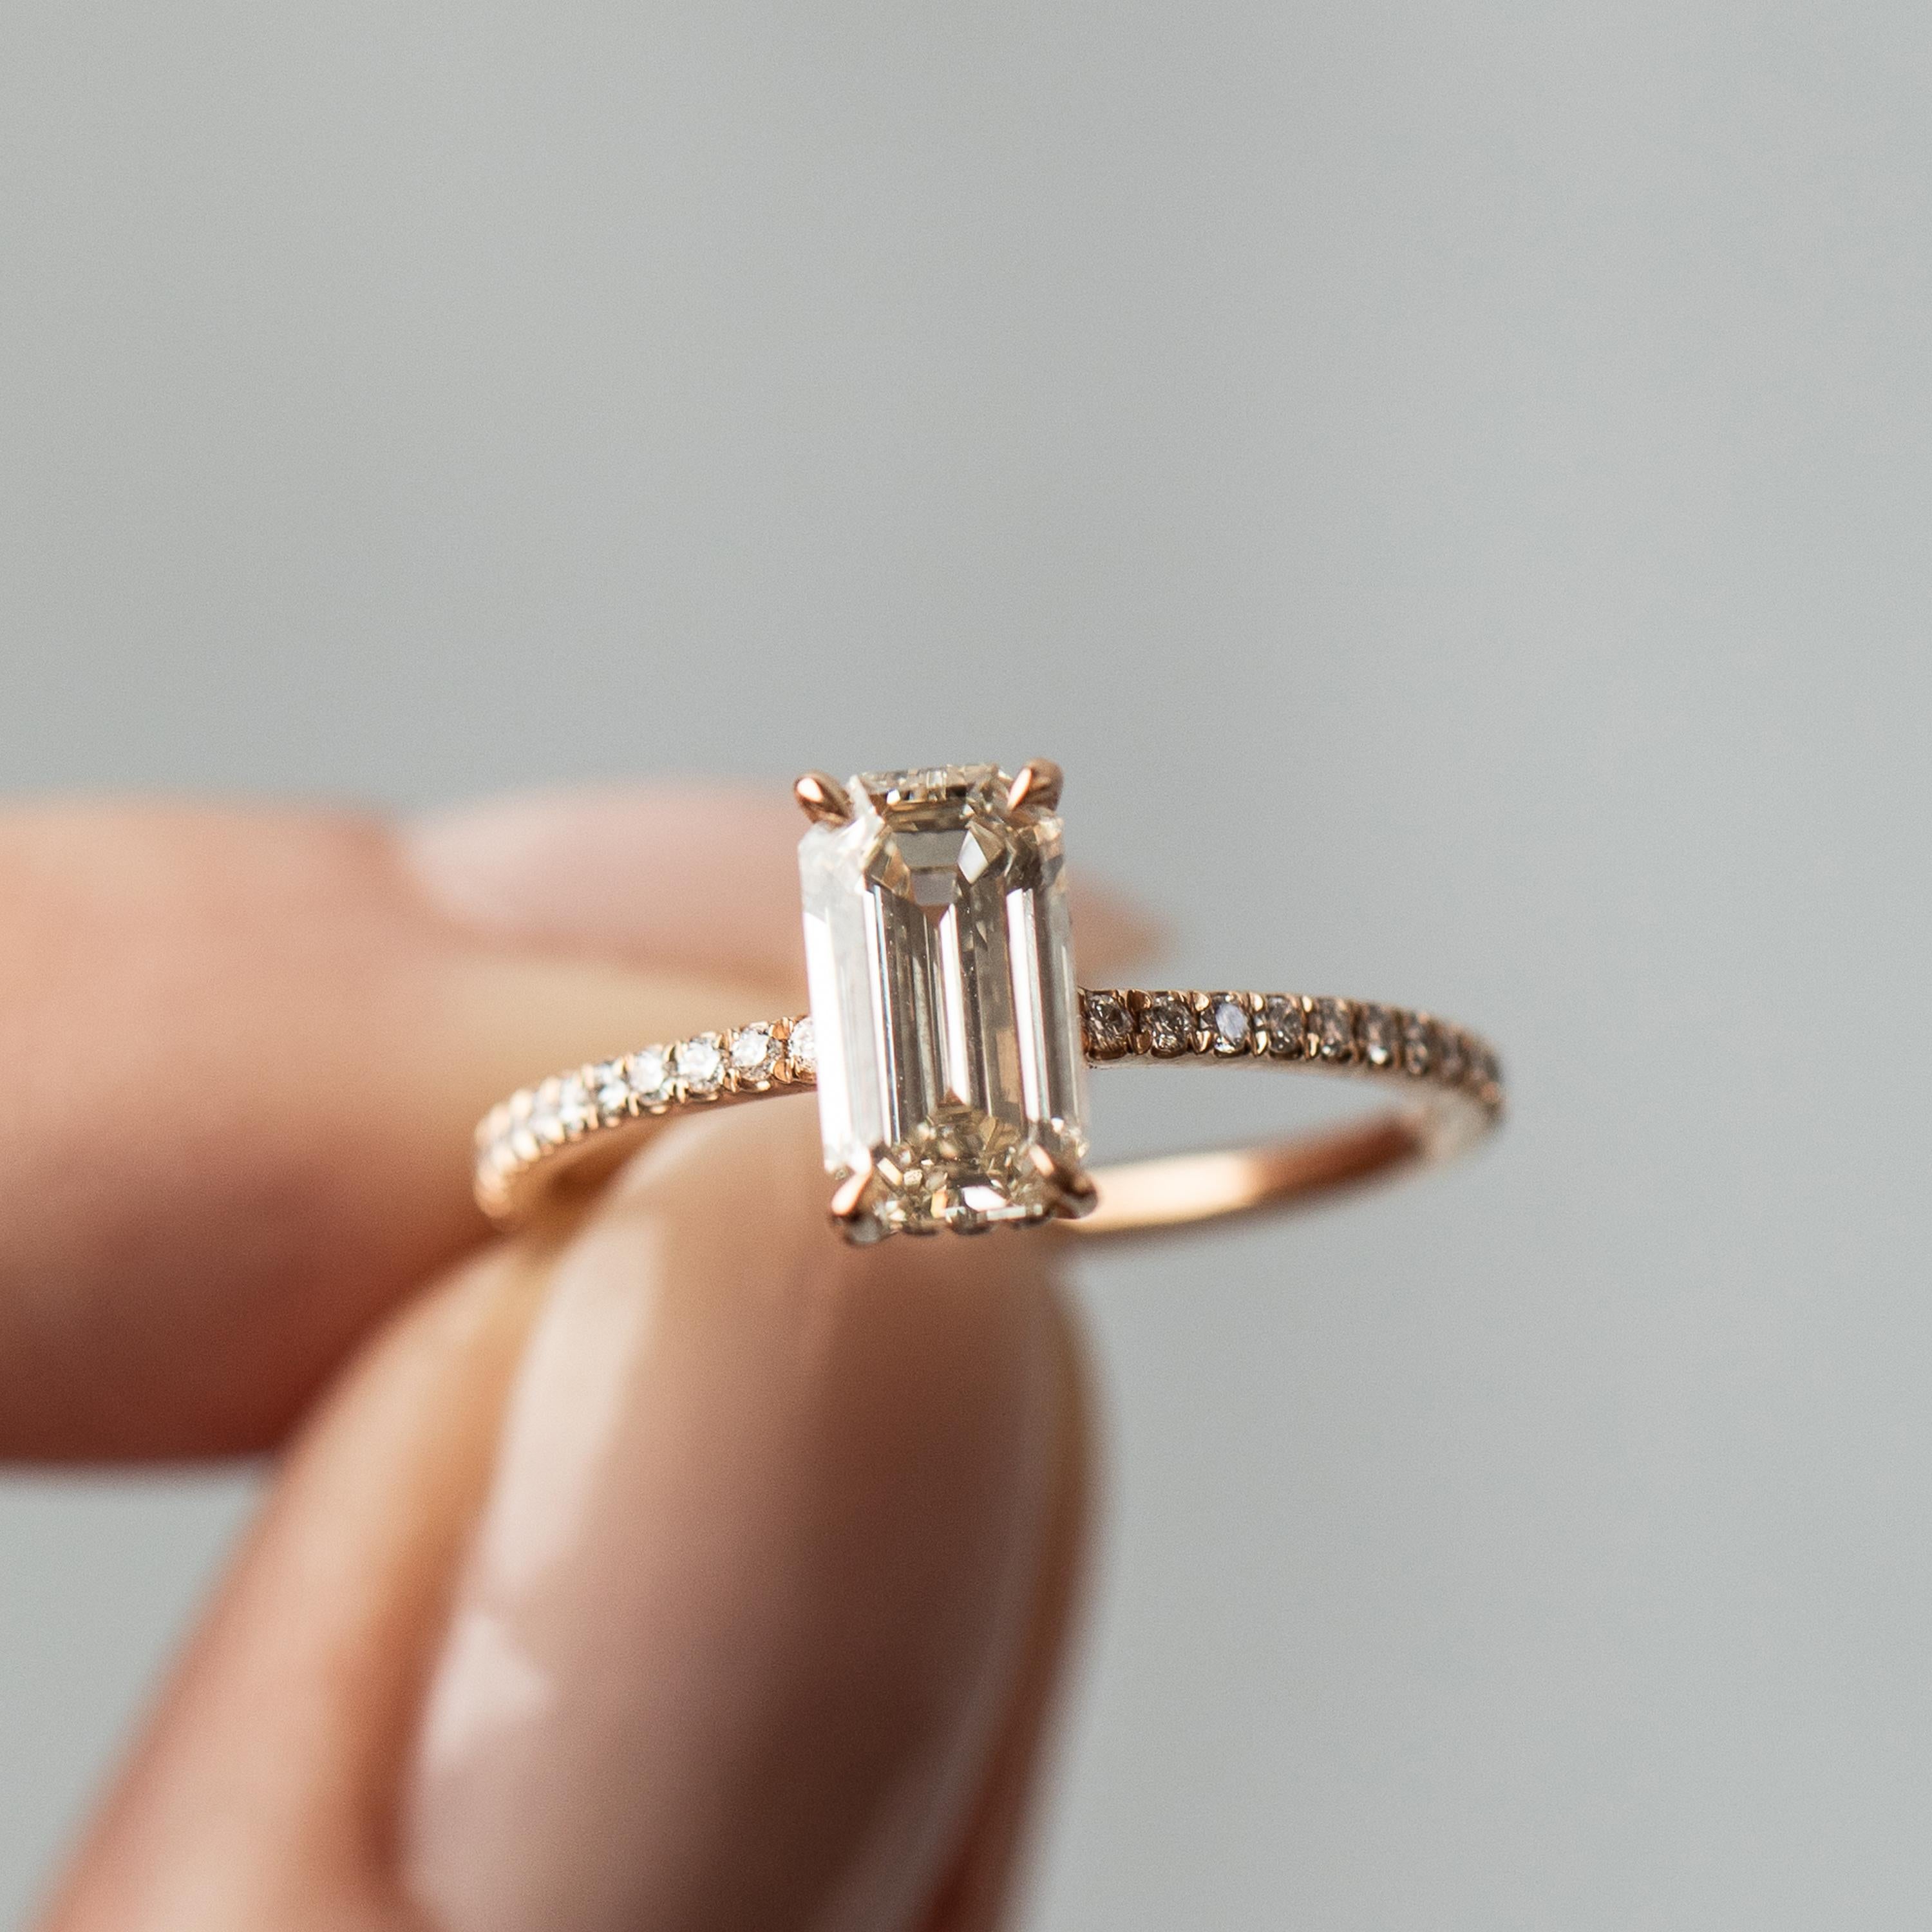 18k Rose Gold with 1.14ct Light Pinkish/Brown Emerald Cut  Diamond and White Diamond Pave - Size 5 

Handmade in New York City. 

Eva Fehren White, a bridal collection comprised of engagement rings and wedding bands, was launched in 2014, embodies